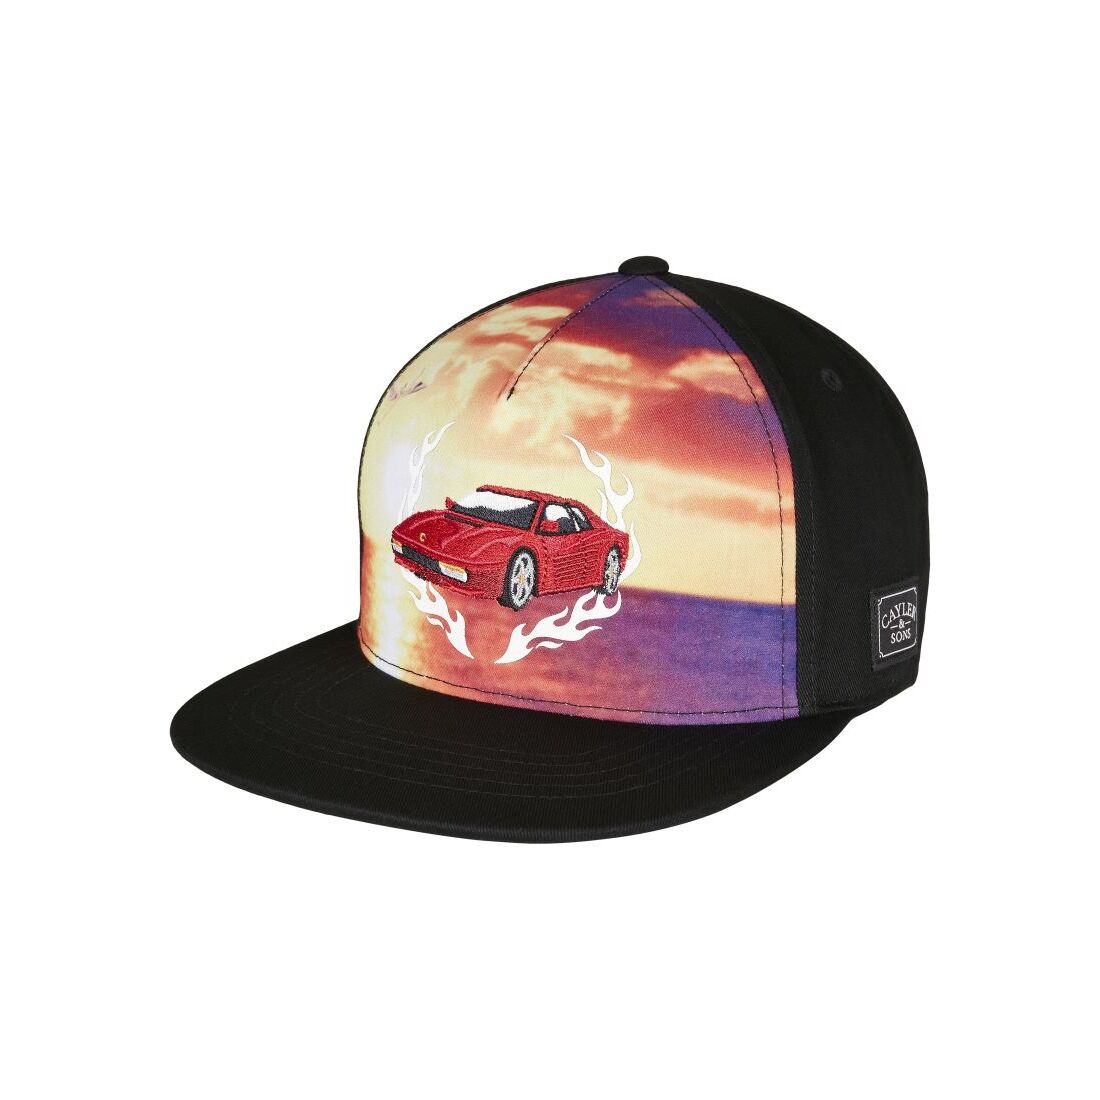 casquette cayler & sons wl ride or fly